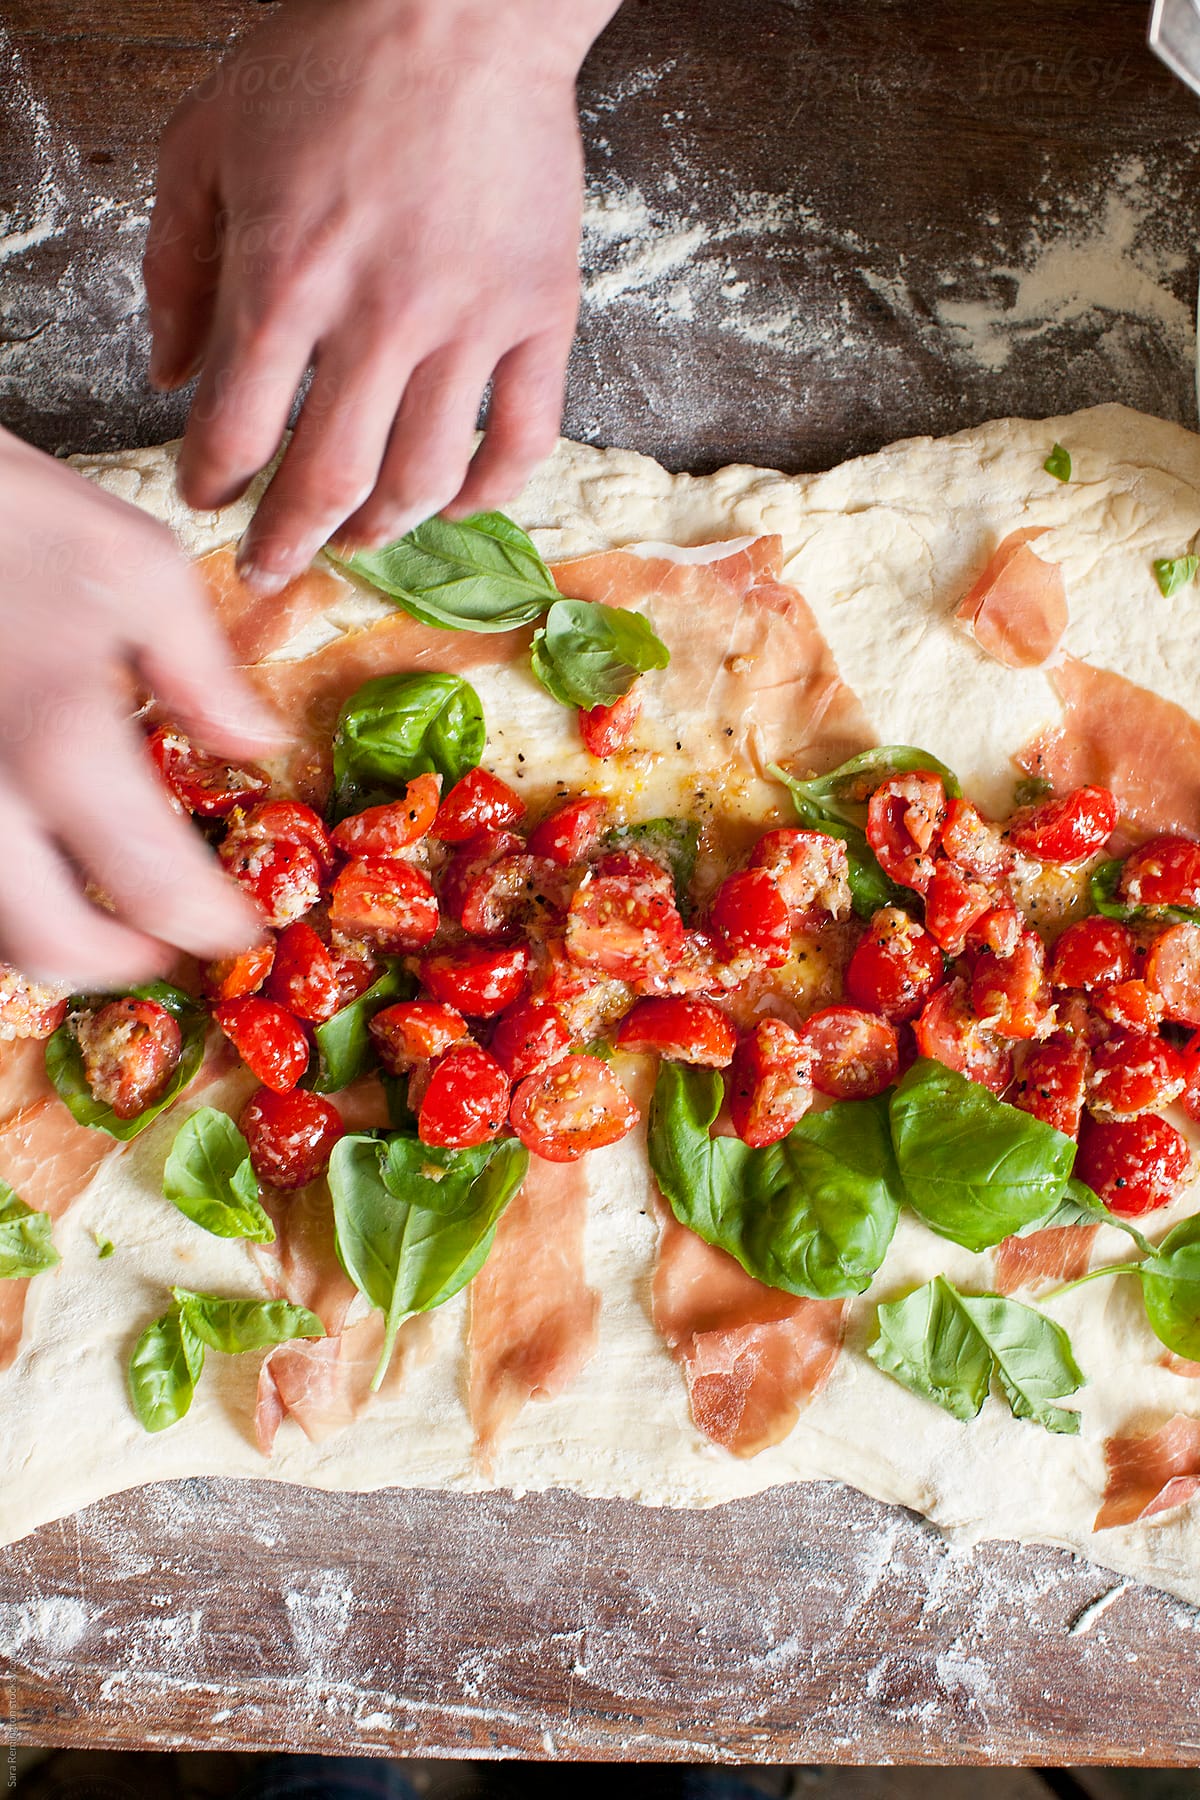 Process of Making Pizza Bread With Basil and Tomatoes